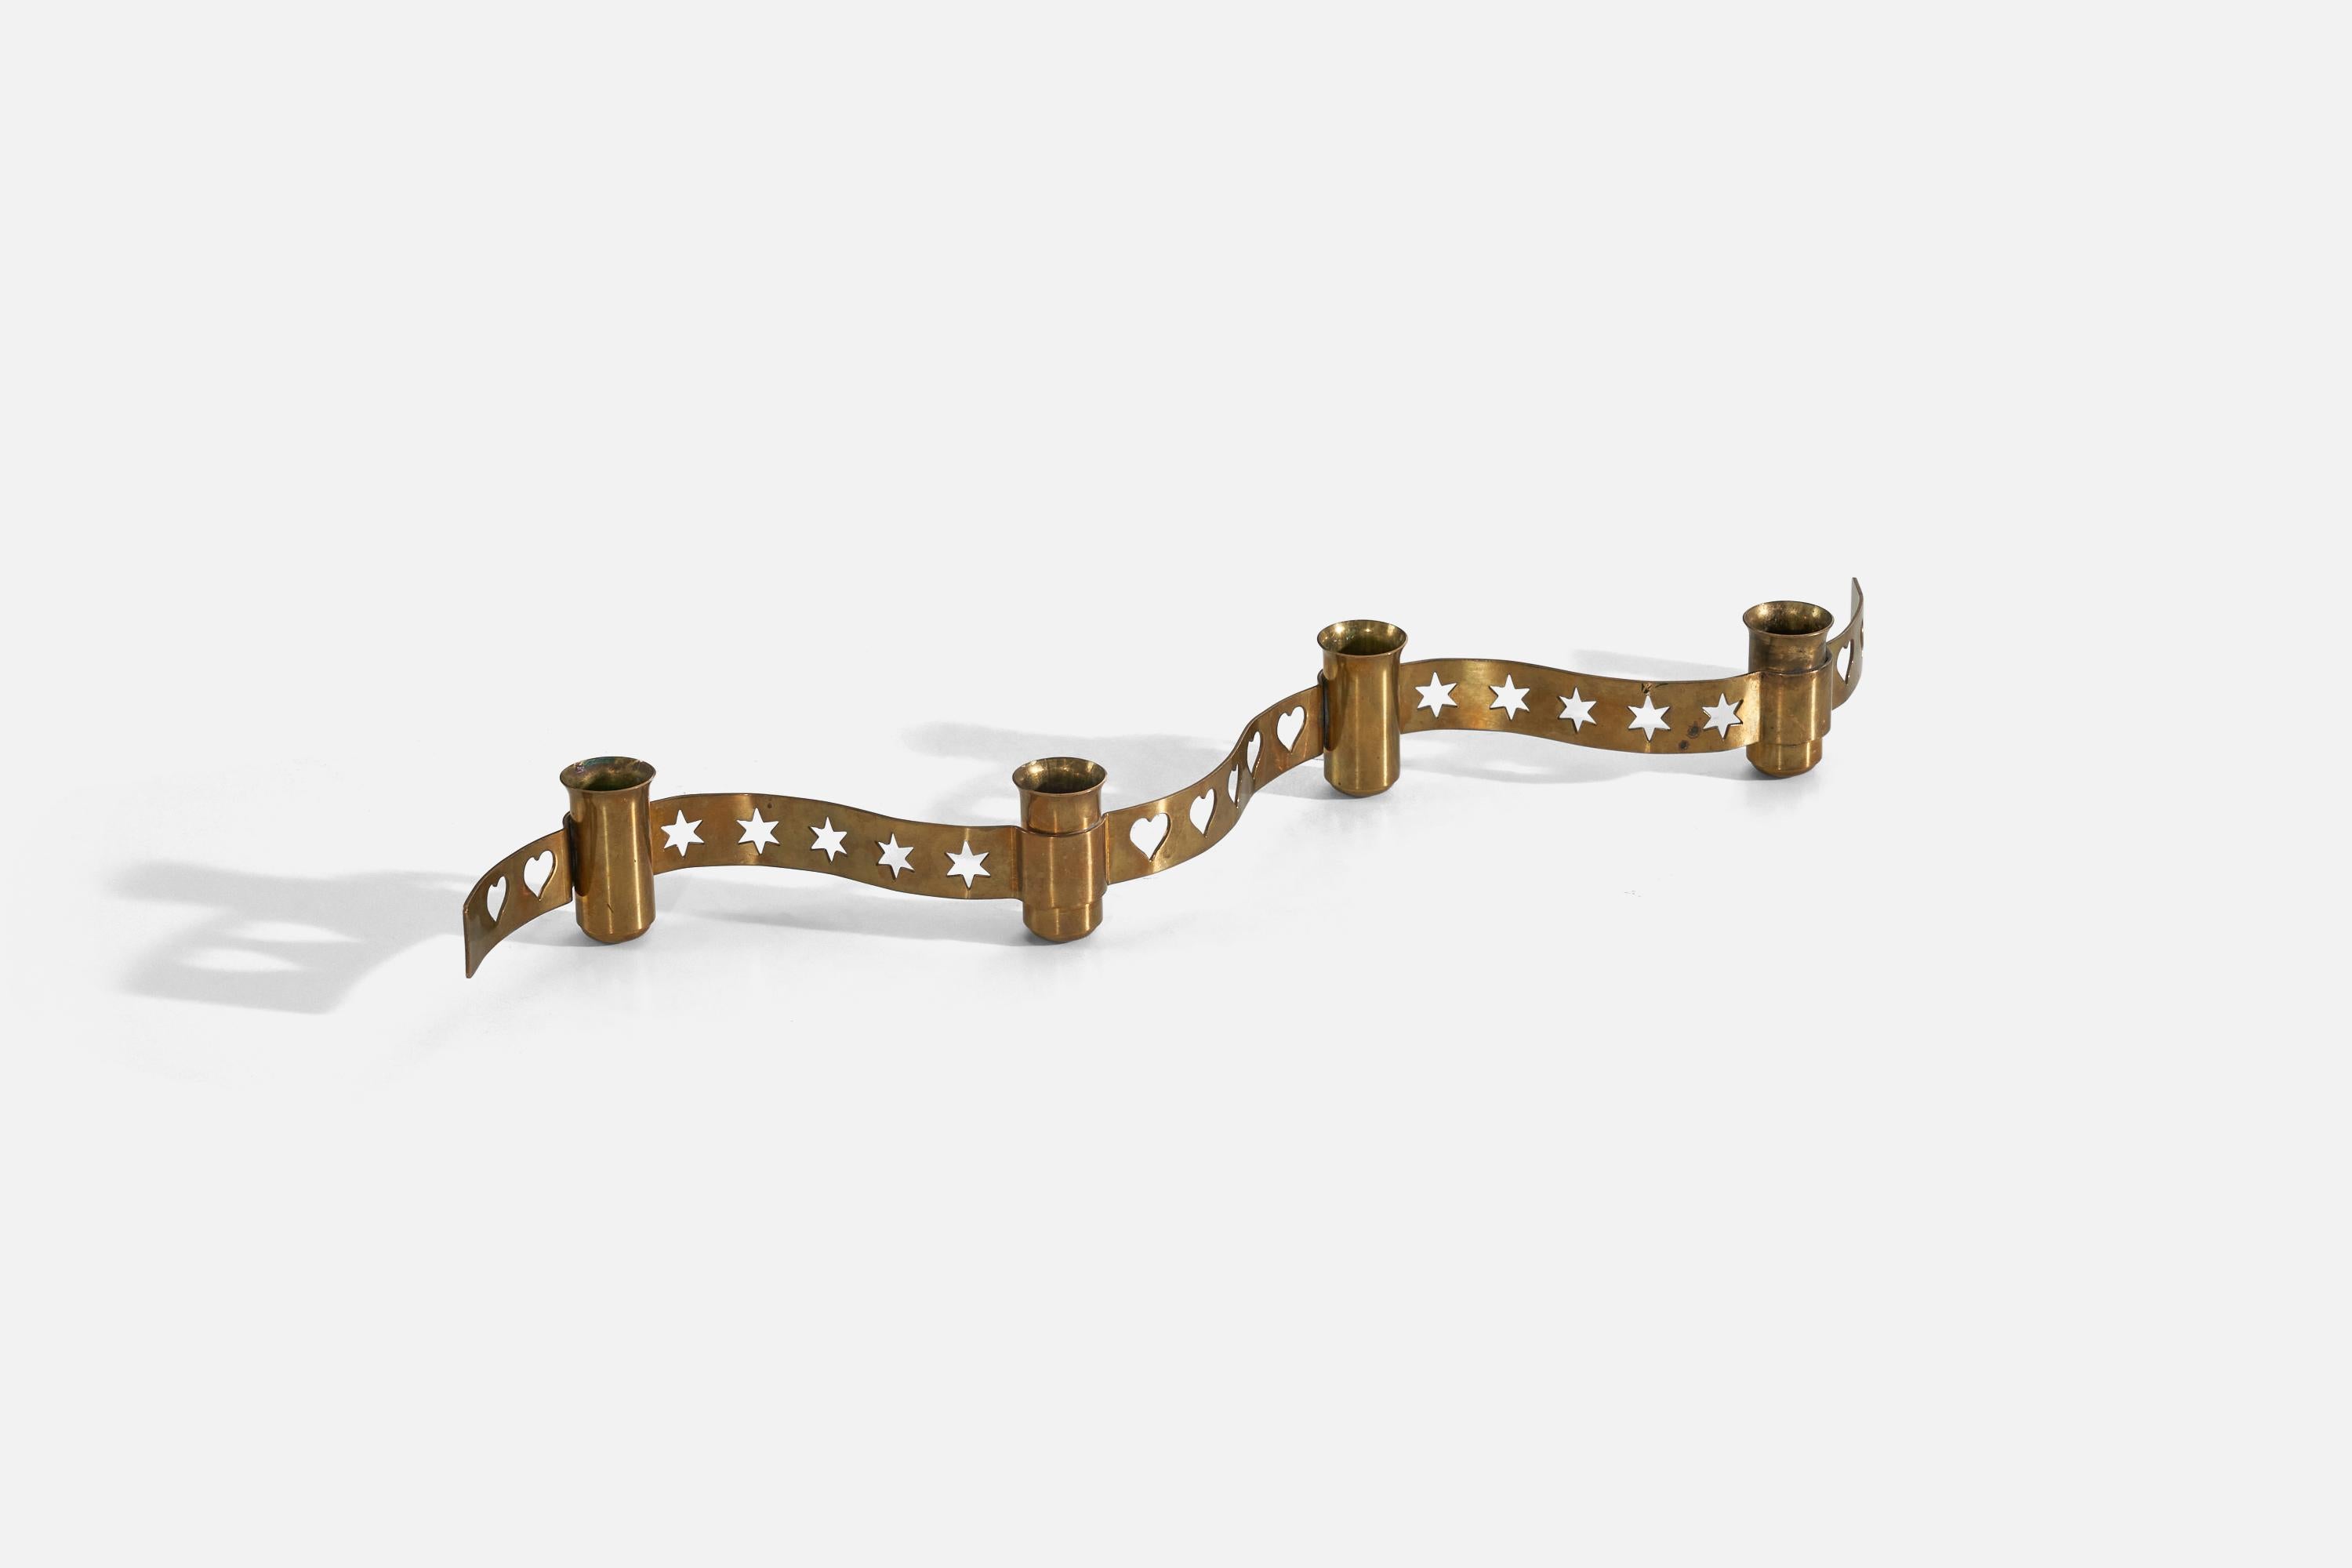 A brass candle holder designed and produced in Sweden, 1940s.